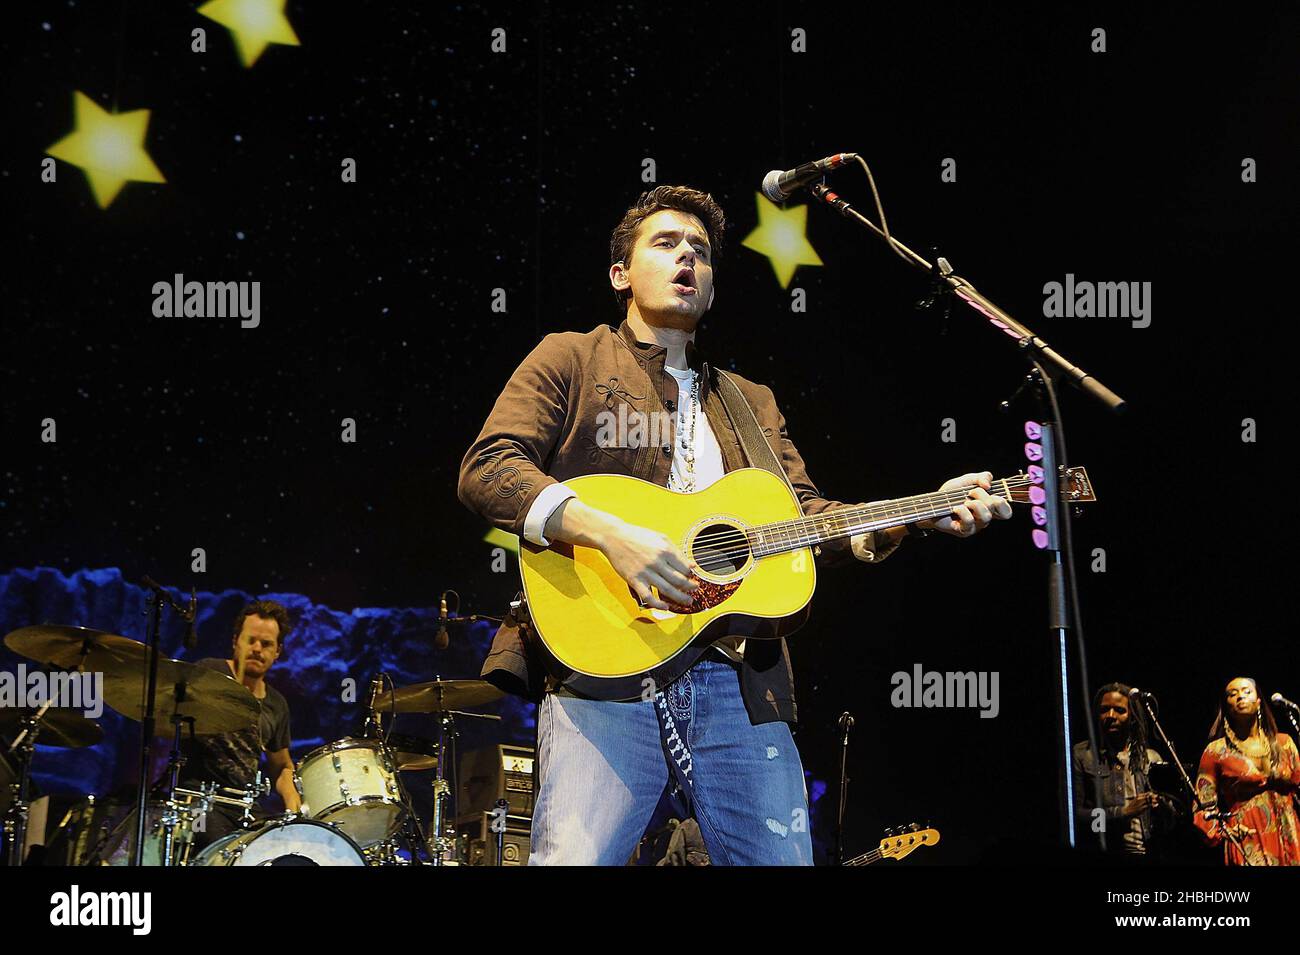 John Mayer performs on stage at the 02 Arena in London. Stock Photo